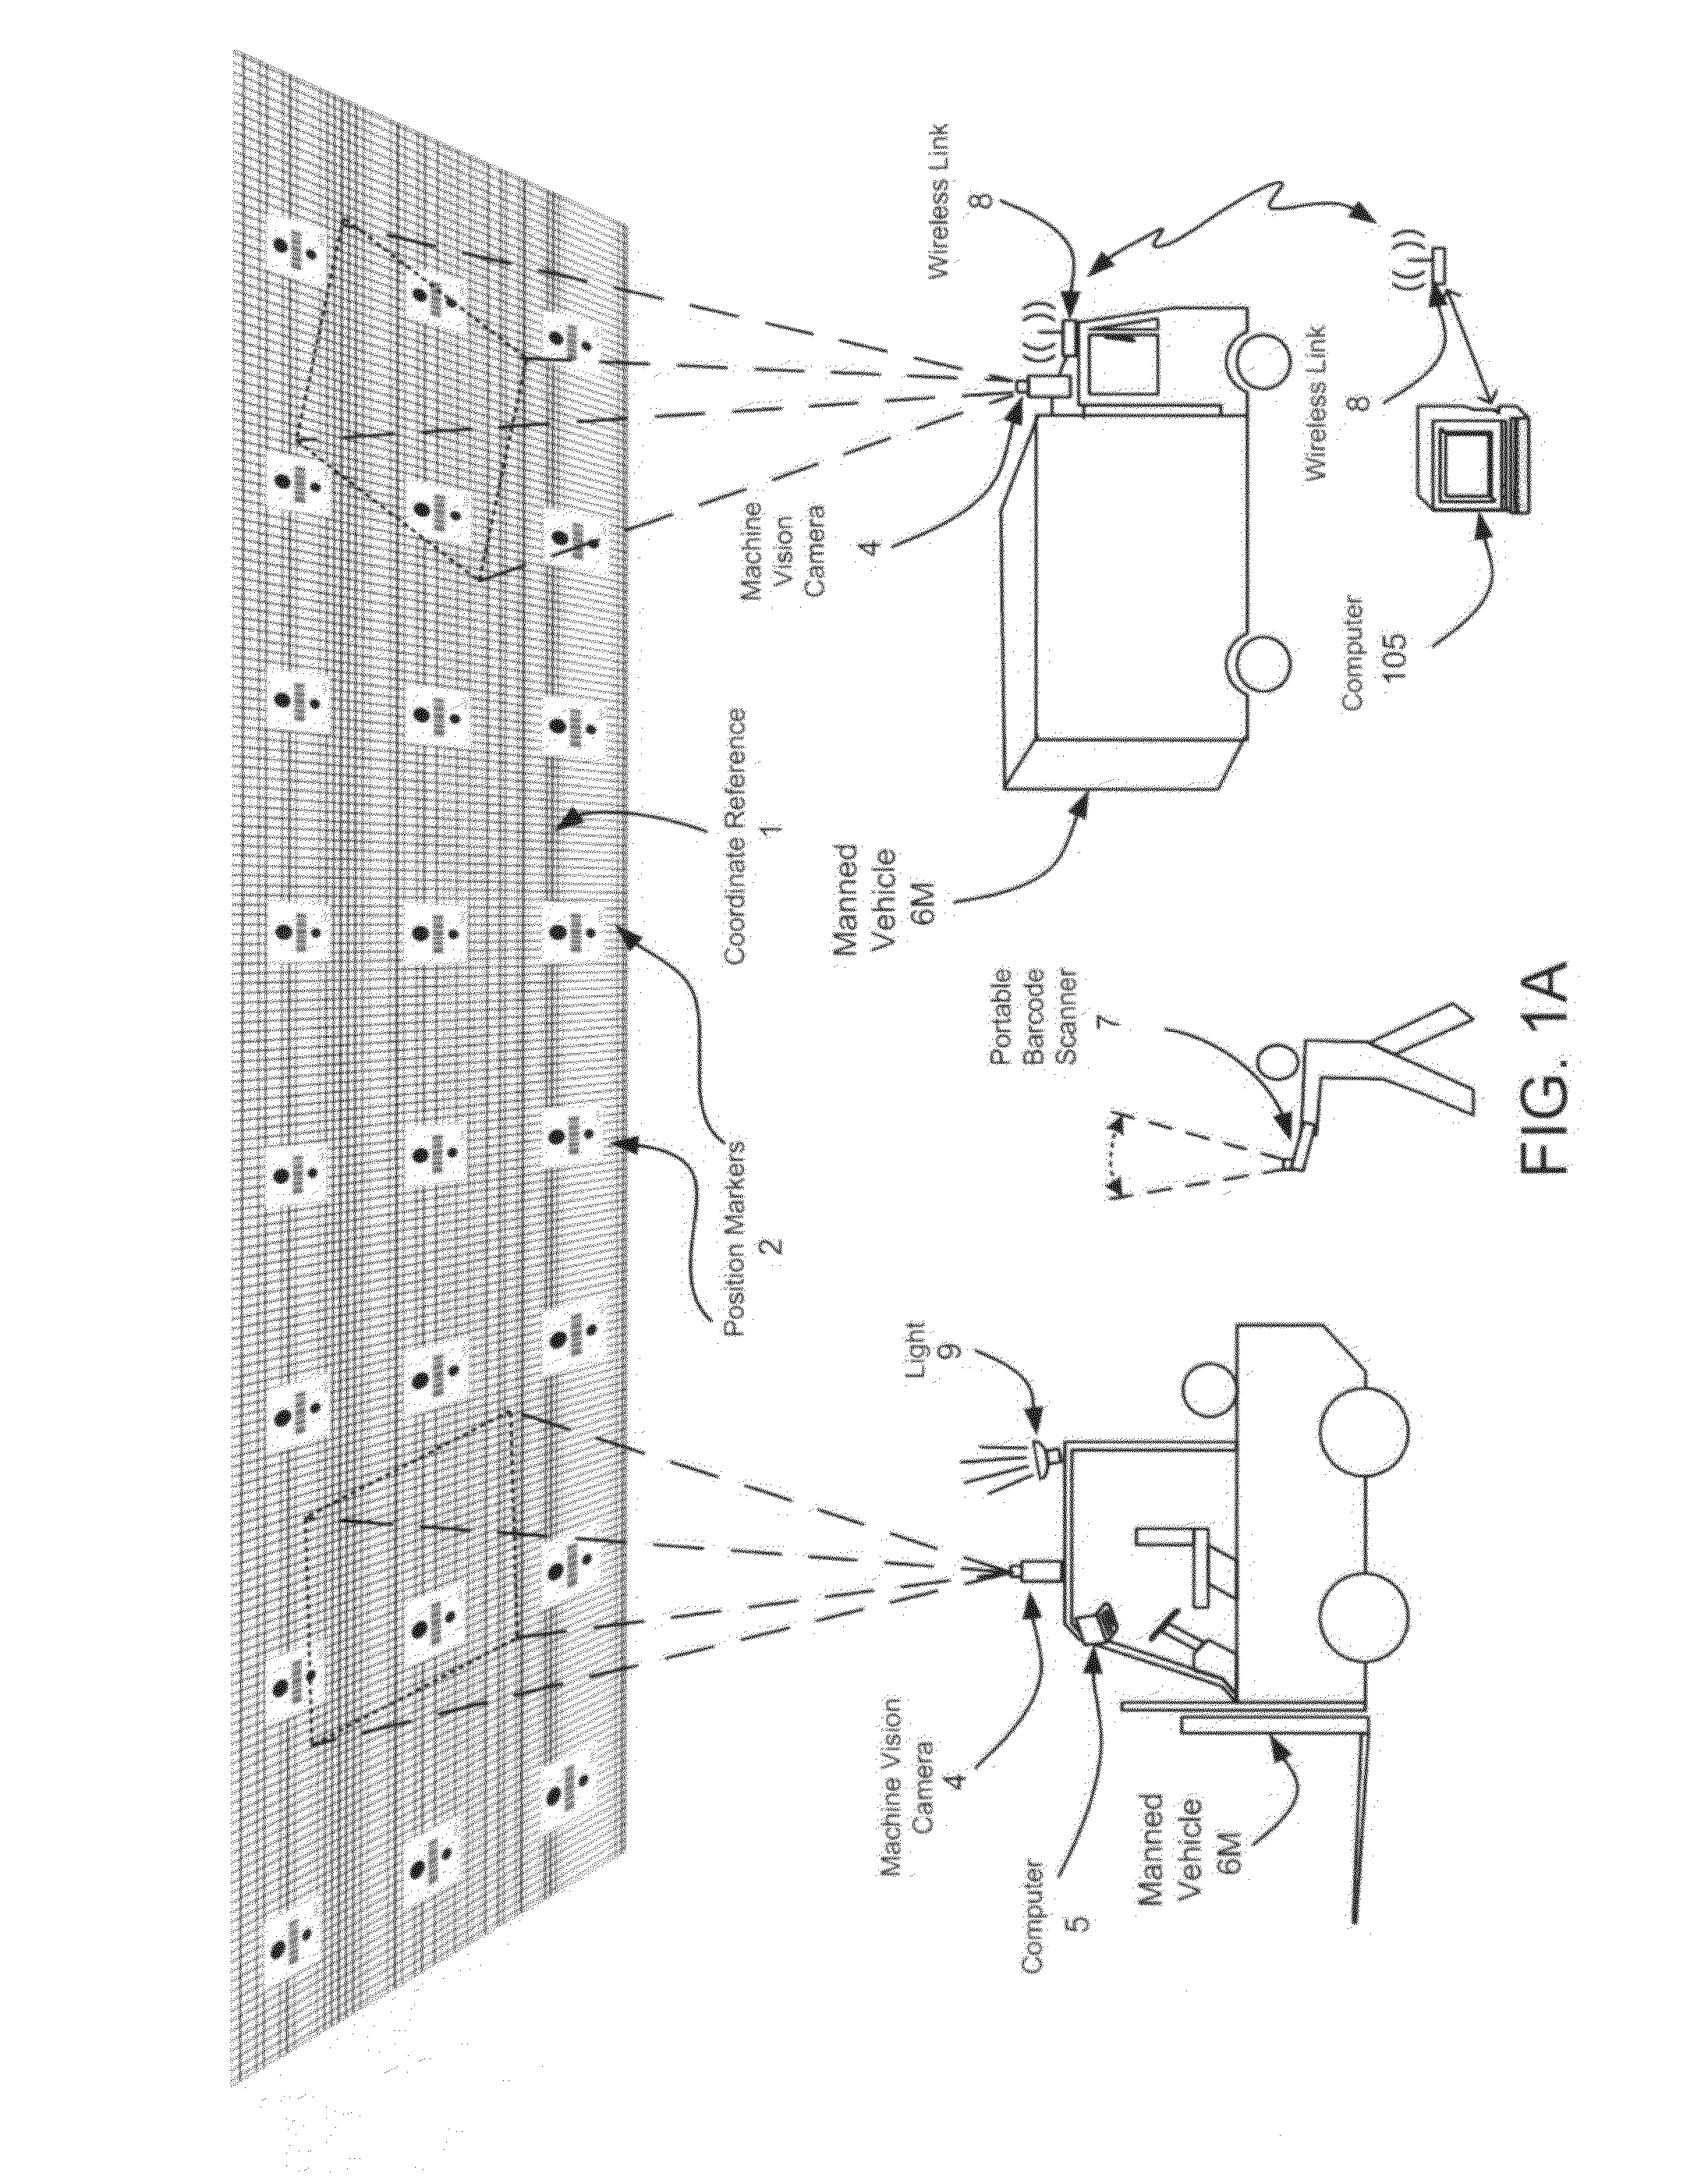 Method and apparatus for managing and controlling manned and automated utility vehicles